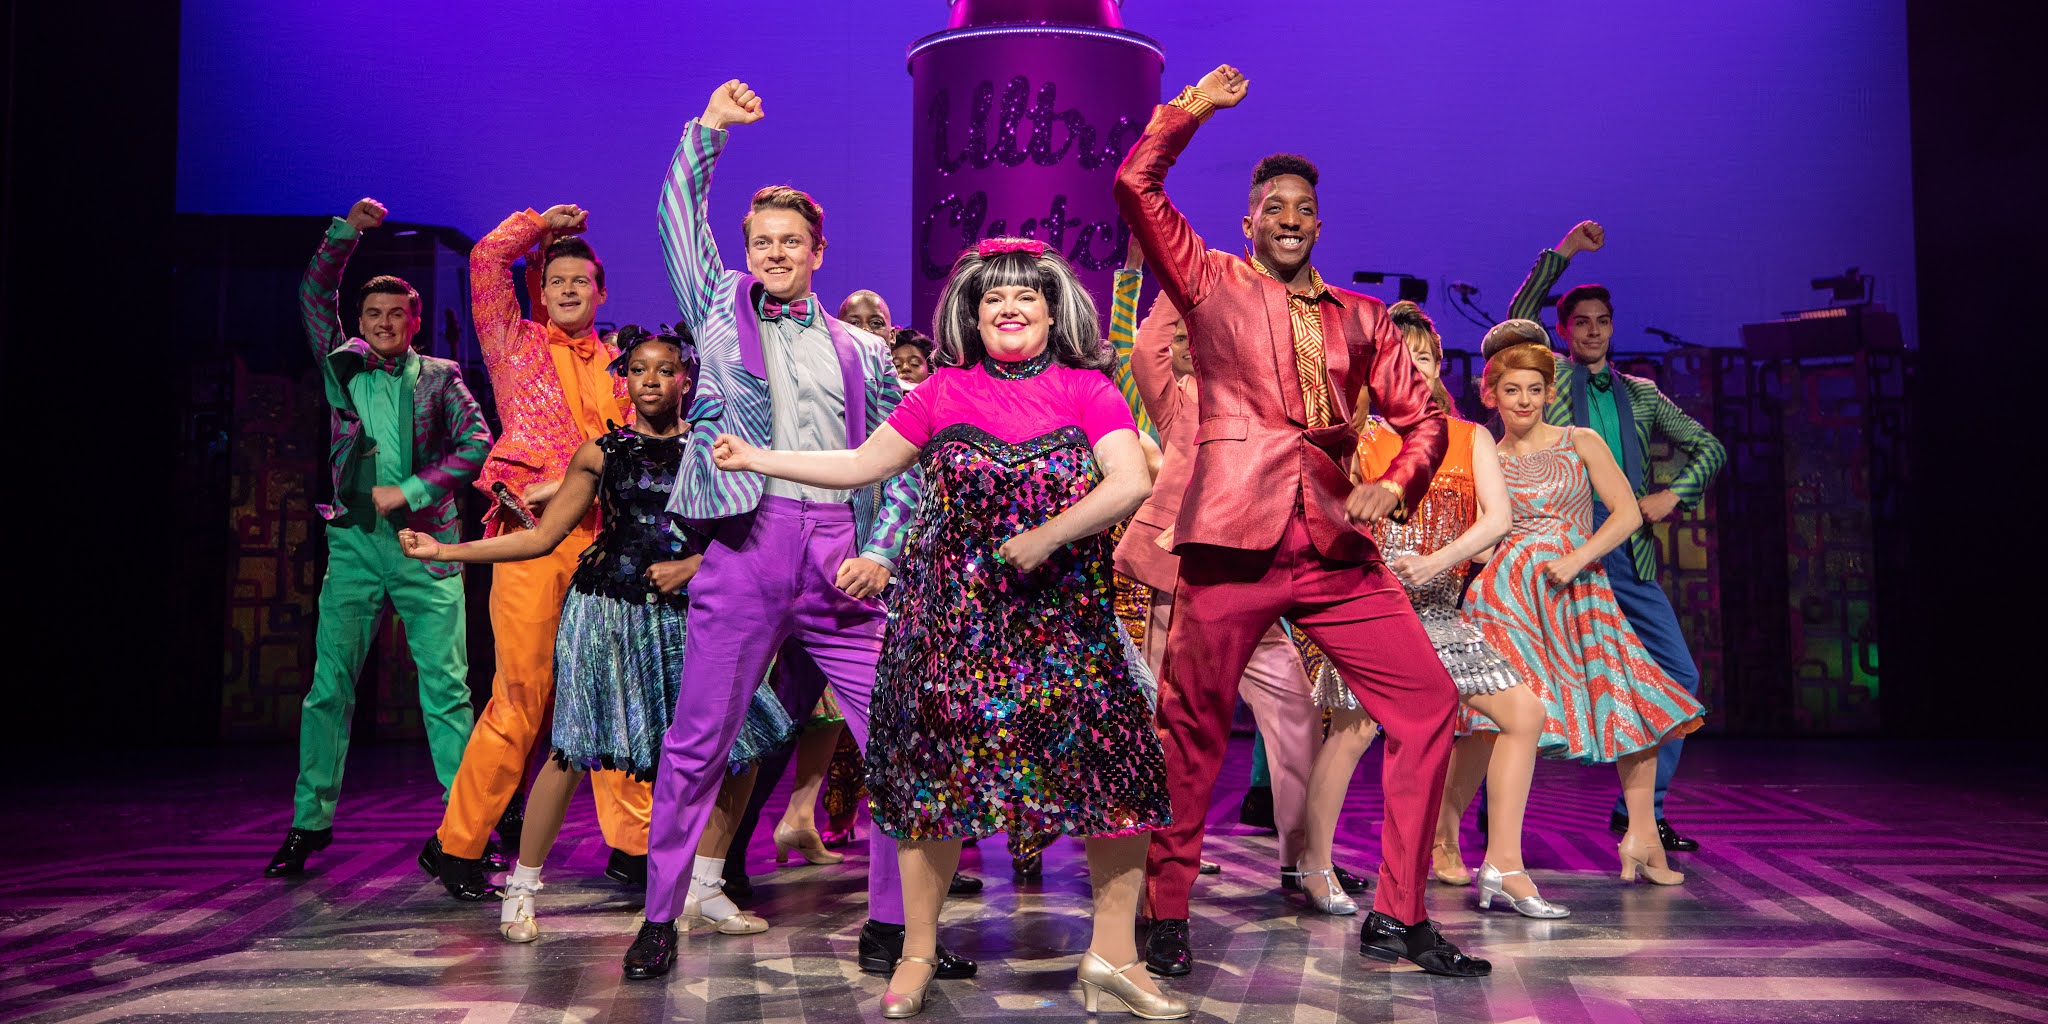 Hairspray at The Plaza Theatre Performing Arts Center